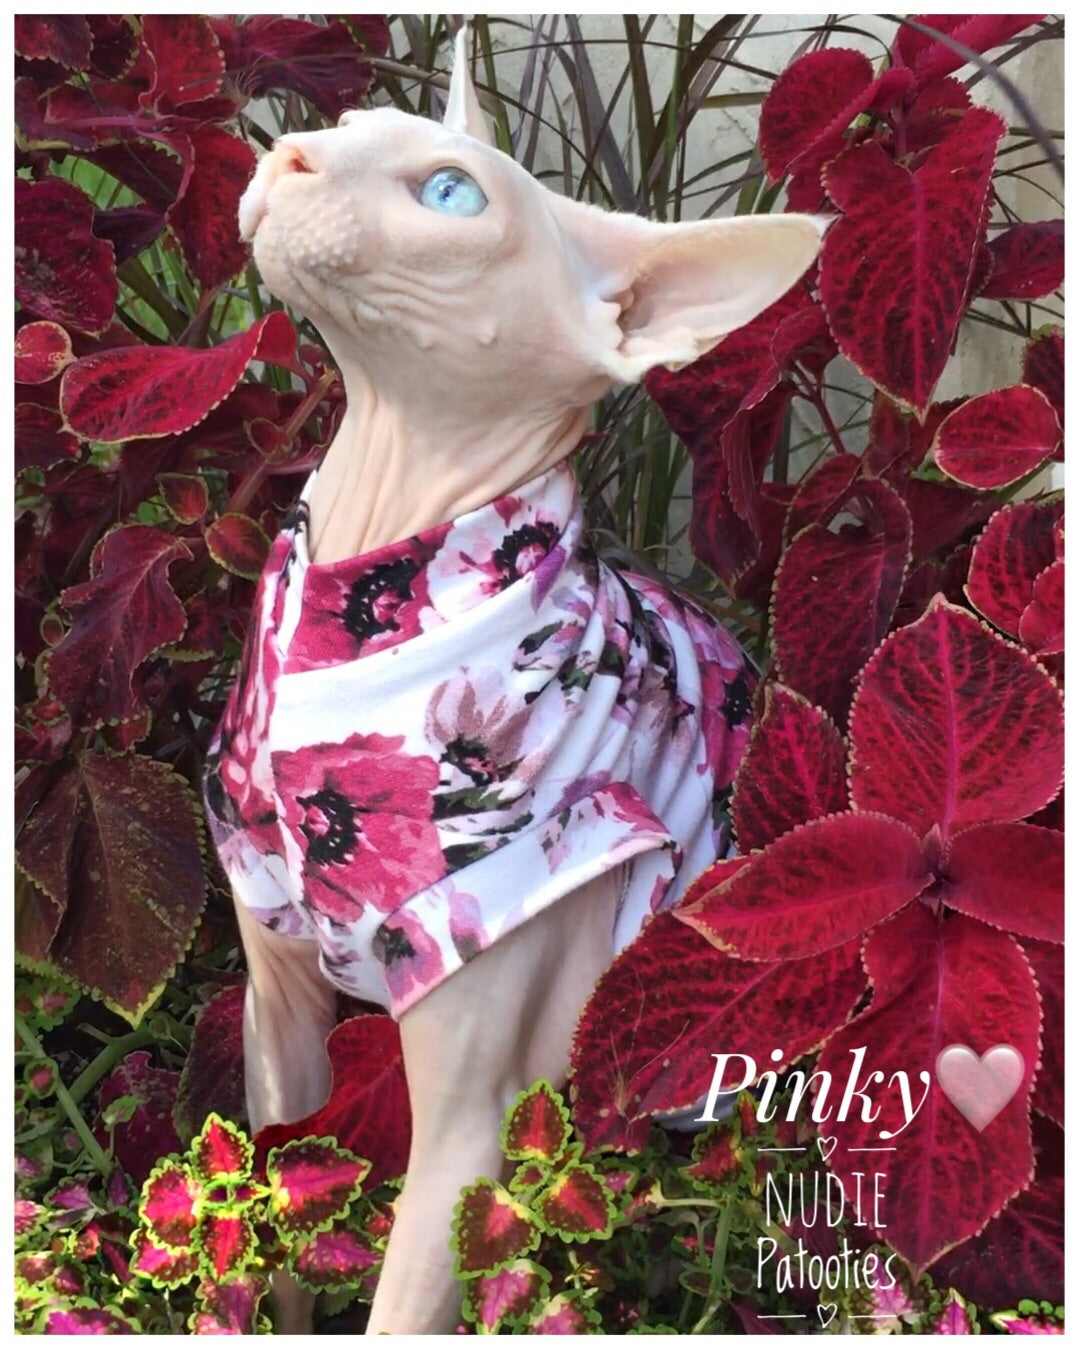 odd eye sphynx cat/ Sphynx Cat Fleece Clothes / clothes for cats/ cat overalls /cat shirt/ cat sweater/ cat sweatshirt/ pet sweater/ Sphynx cat clothes/ Sphynx clothing / cats clothes/ shirt for cat/ cat clothes/ tattoo/ skull/ designer cat clothes/ cat pjs/best sphynx clothes 